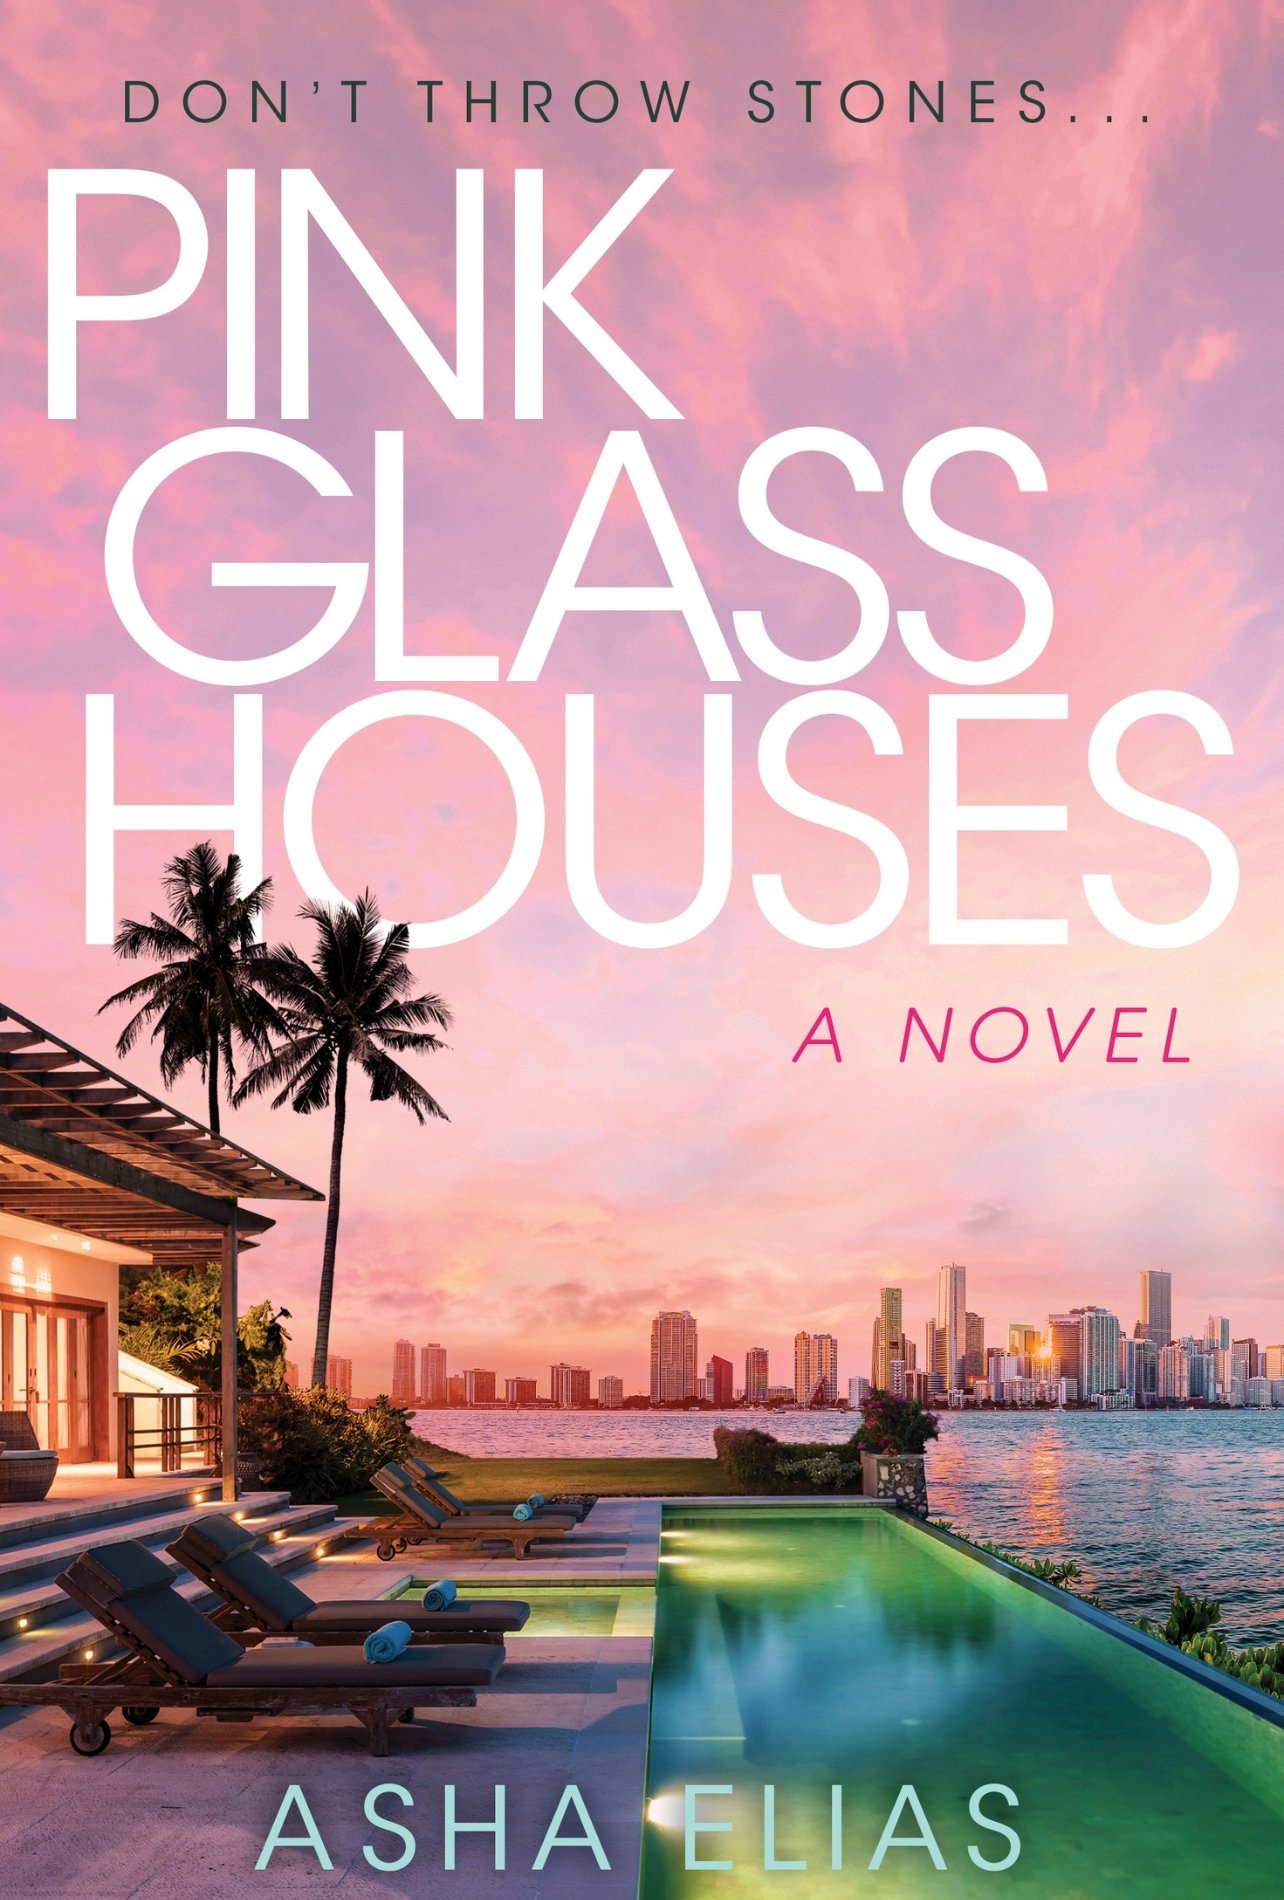 “Pink Glass Houses” book cover by Asha Elias